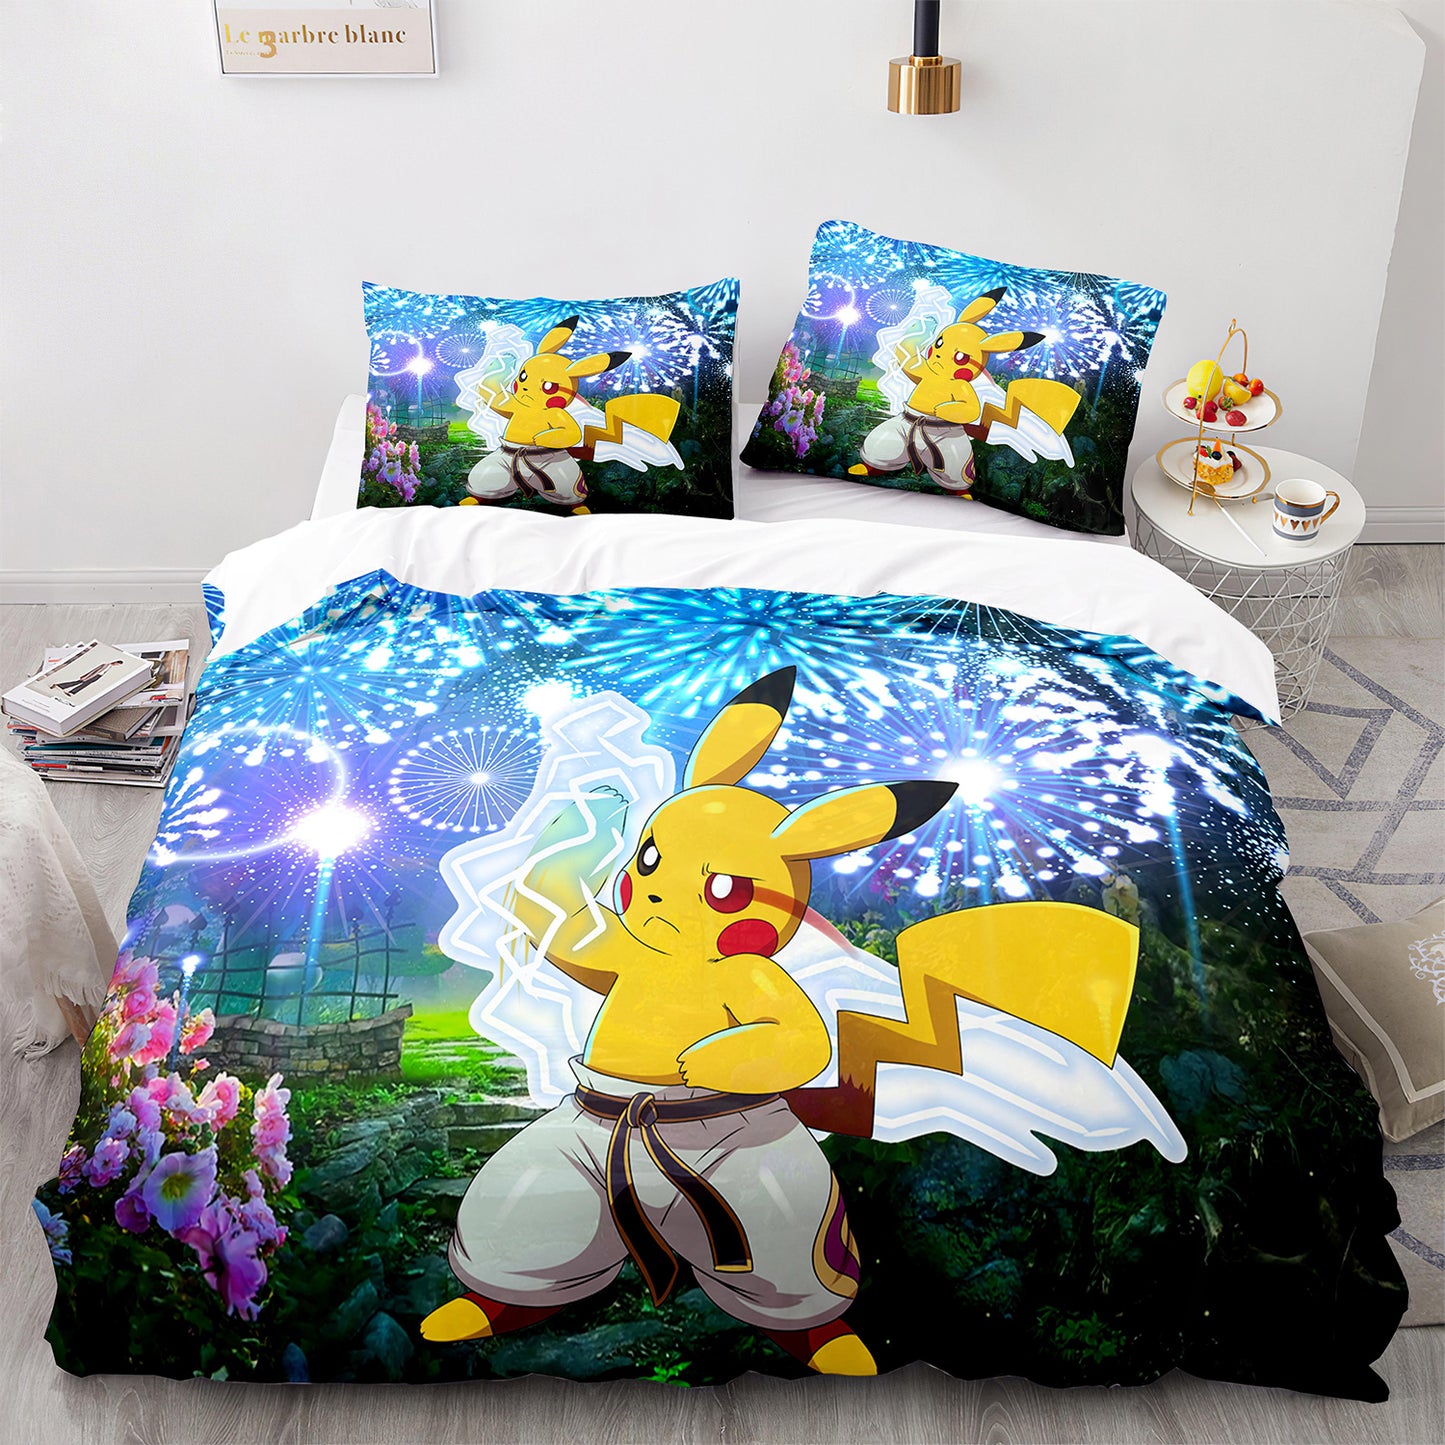 Cutom Duvet Cover Set Pattern Chic Comforter Cover King Size for Teens Adults Bedding Set with Pillowcases  PKQ3023